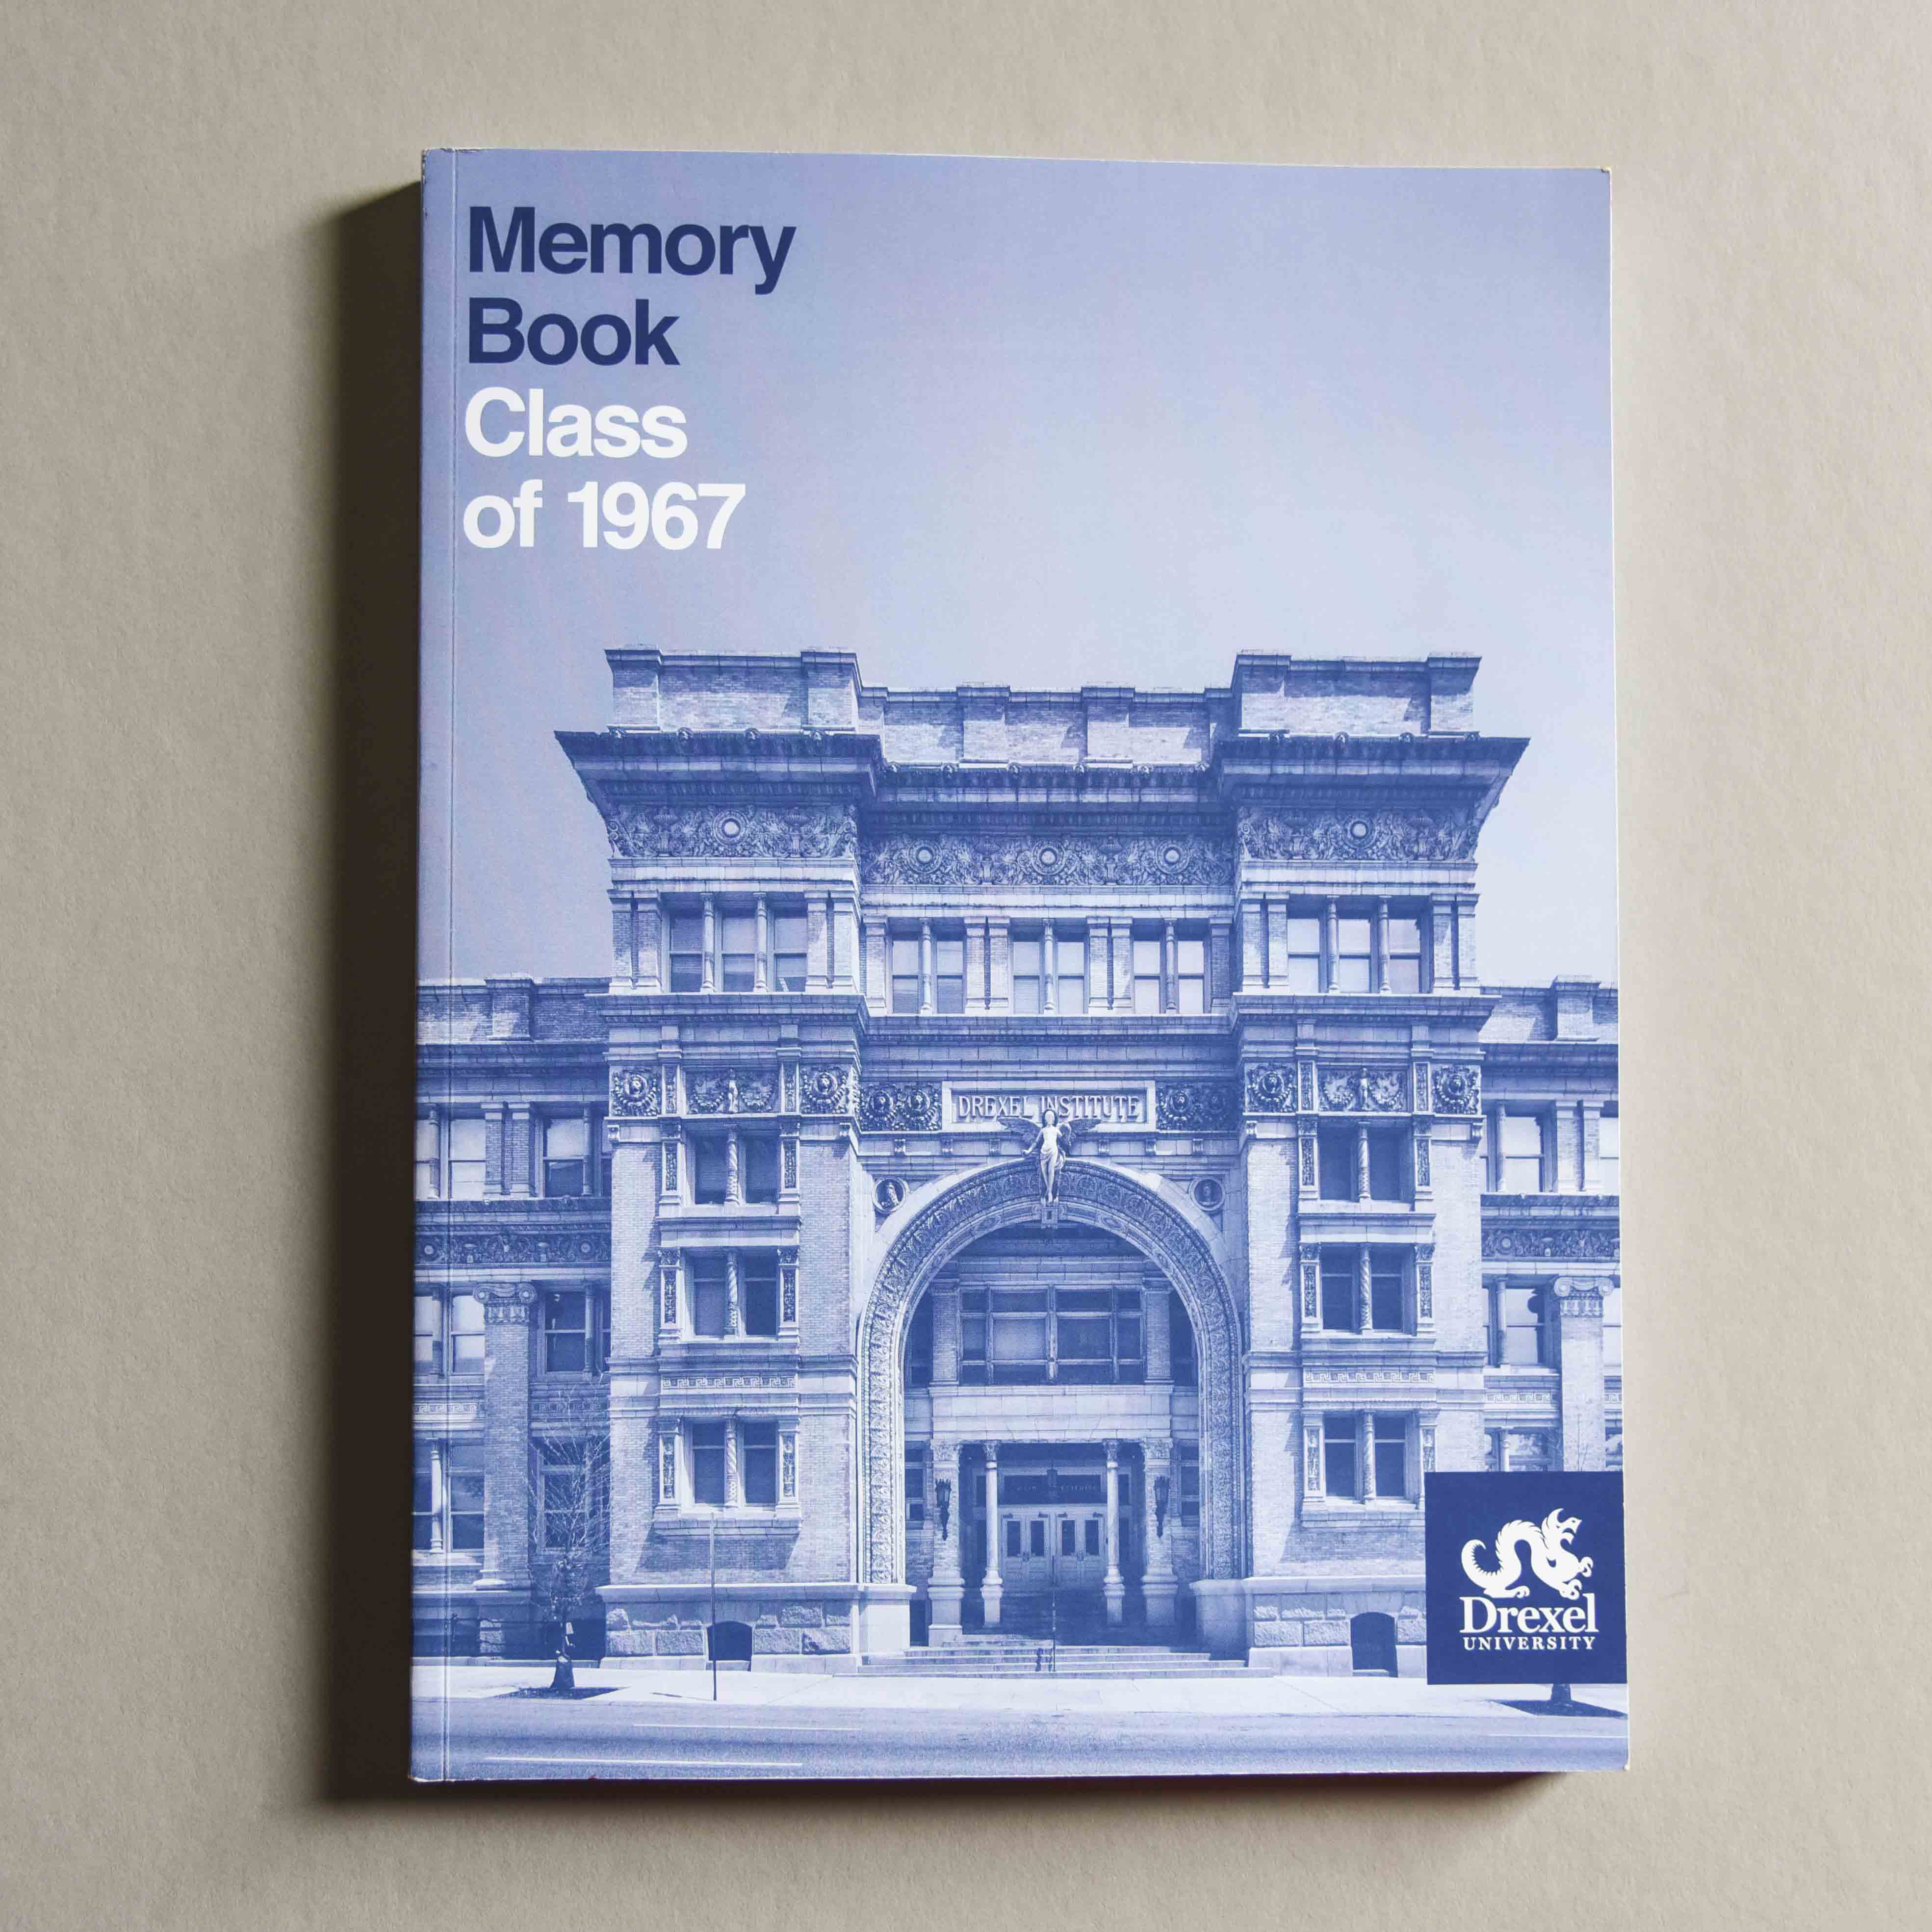 Memory book project